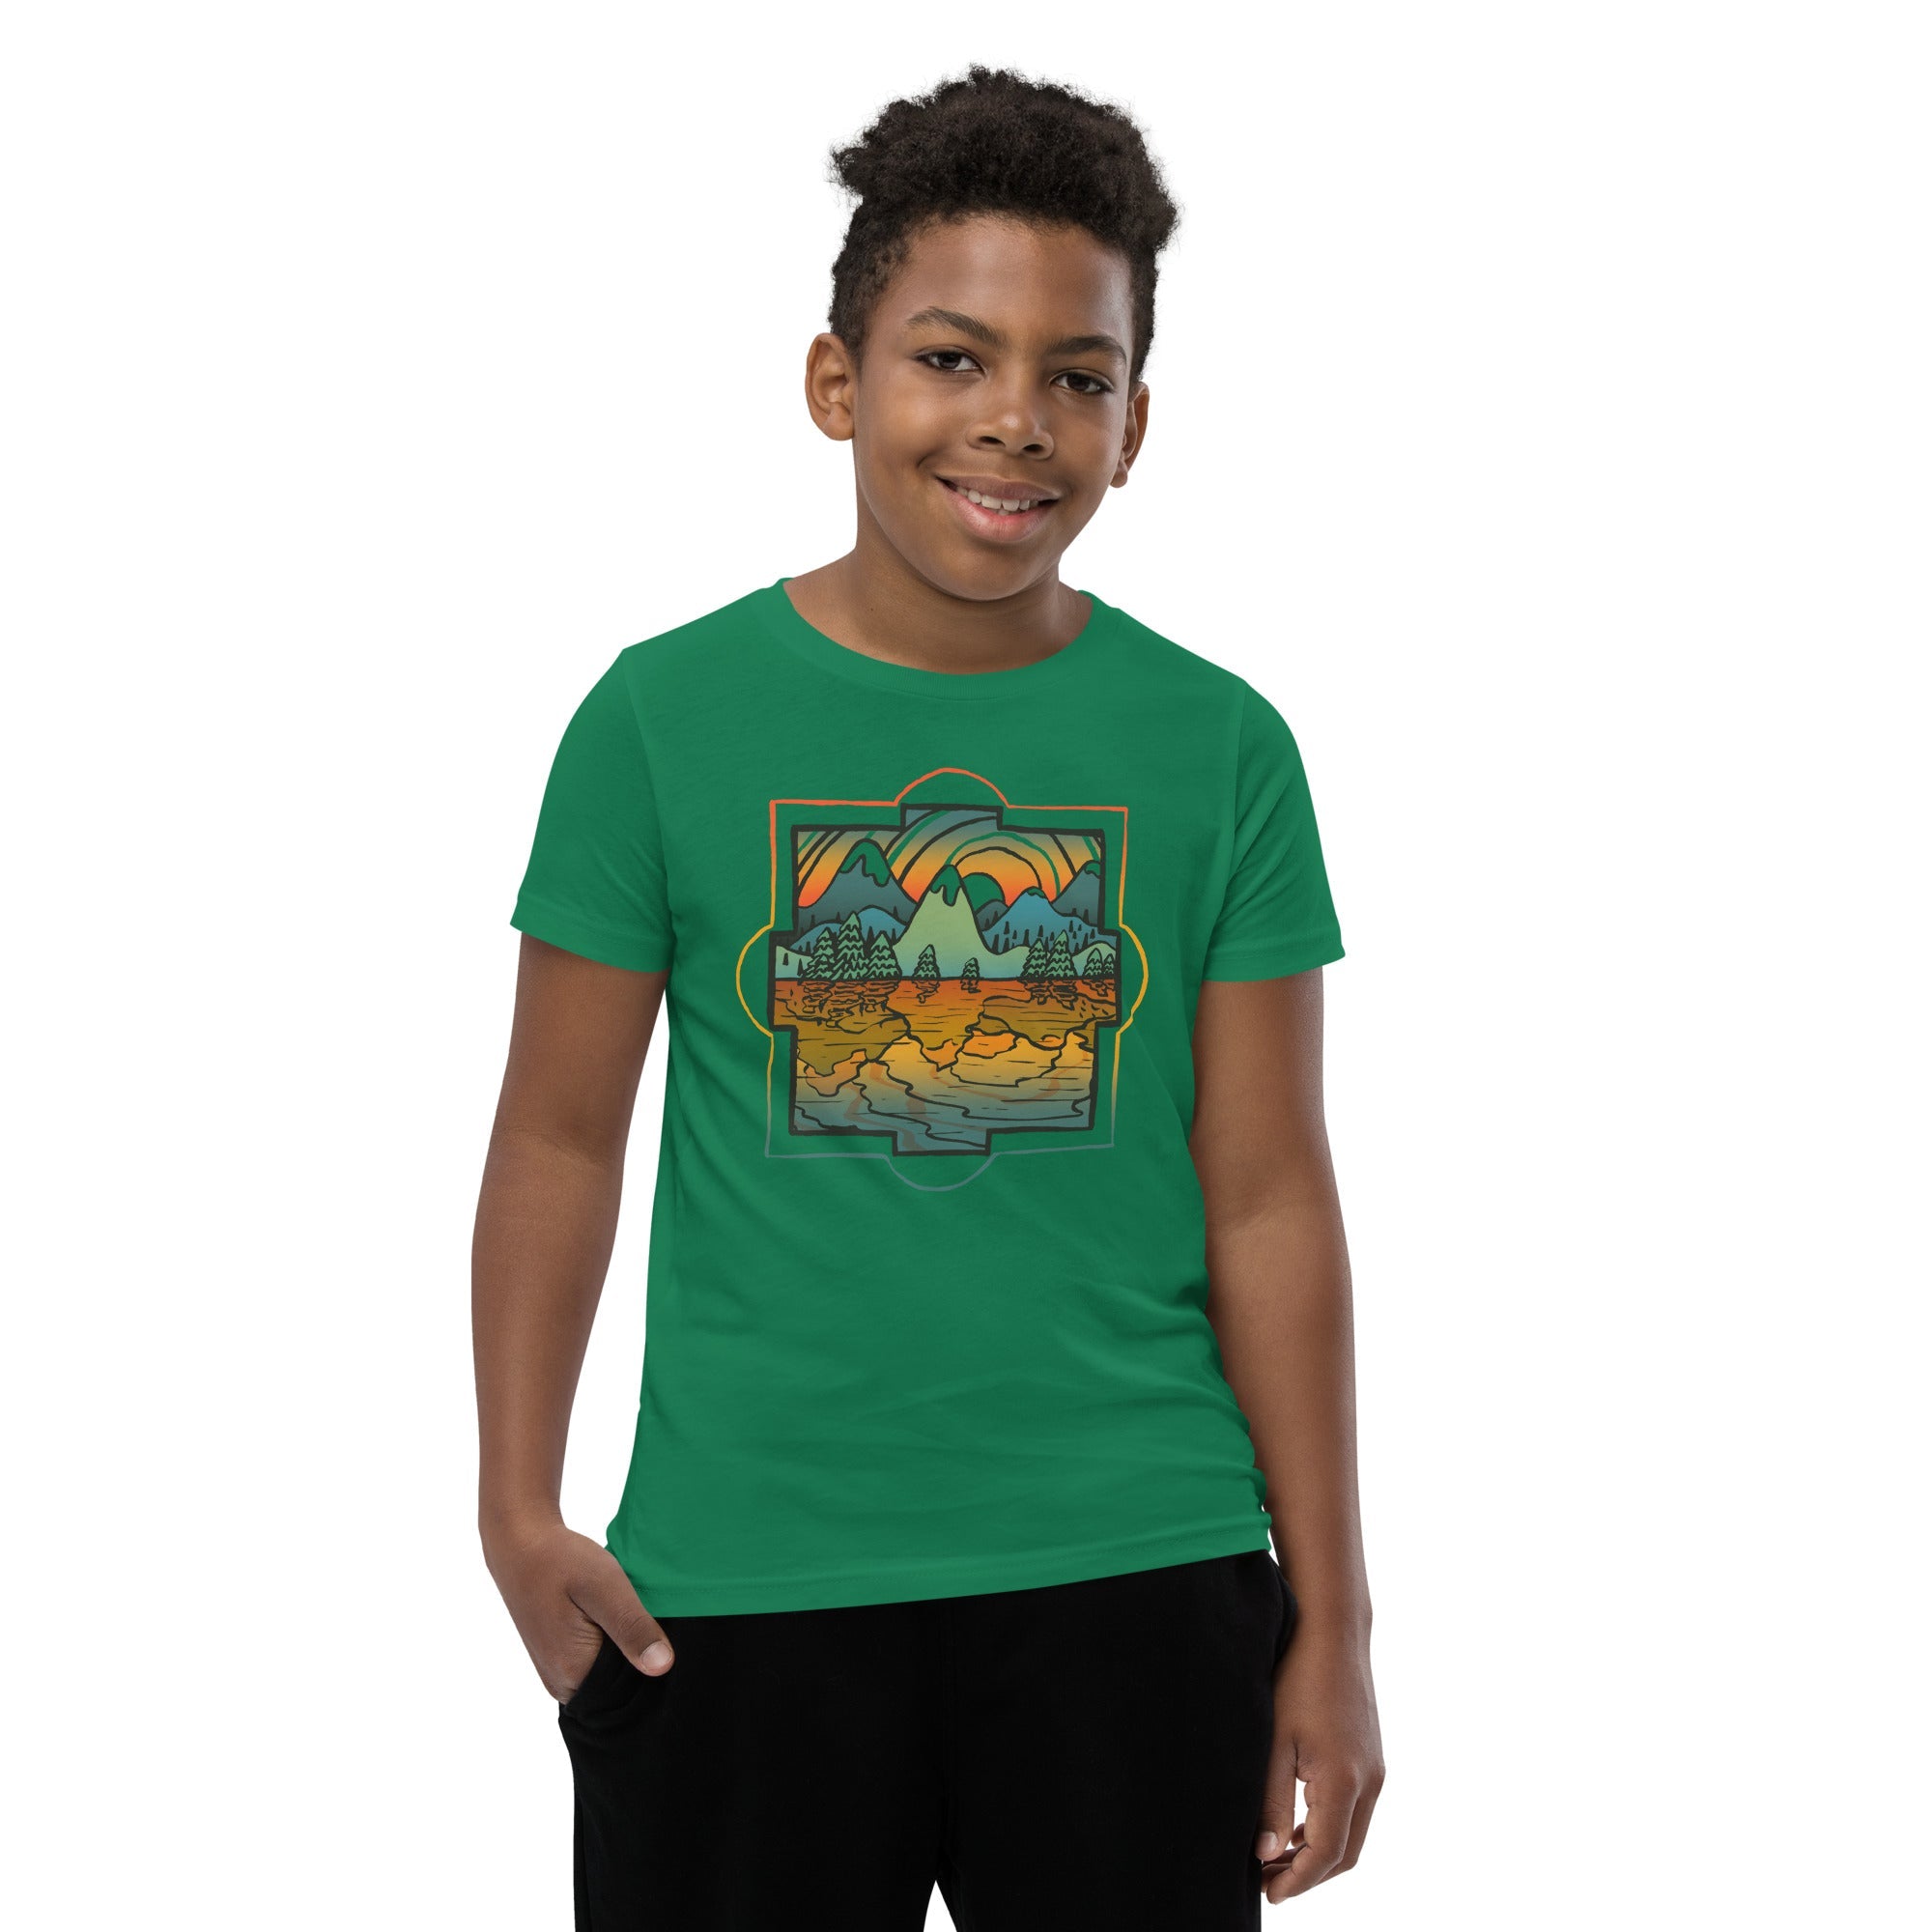 Youth Reflections Cool Artsy Extra Soft T-Shirt | Retro Landscape Kids Tee Boy Model | Solid Threads